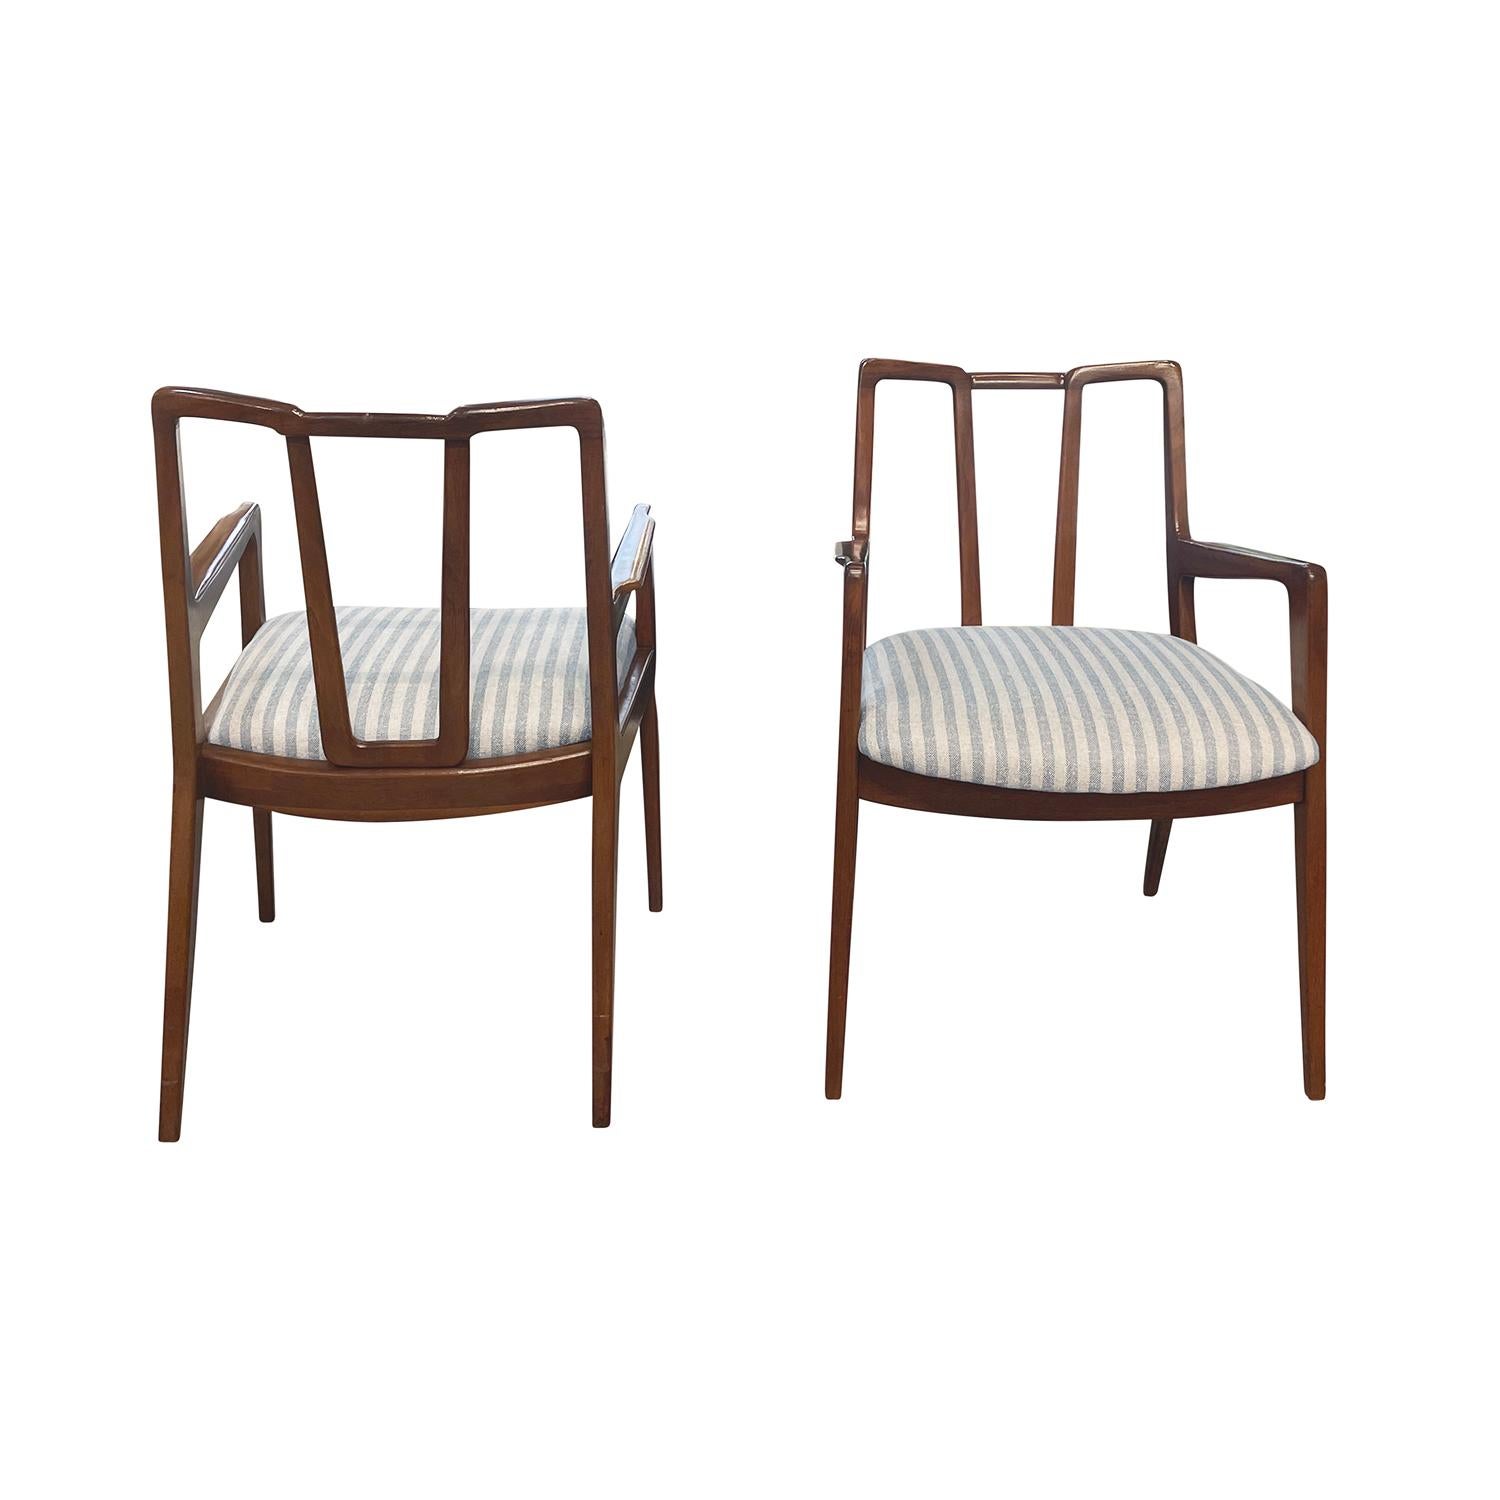 Hand-Crafted 20th Century American Pair of Walnut Armchairs - Dining Chairs by John Stuart For Sale